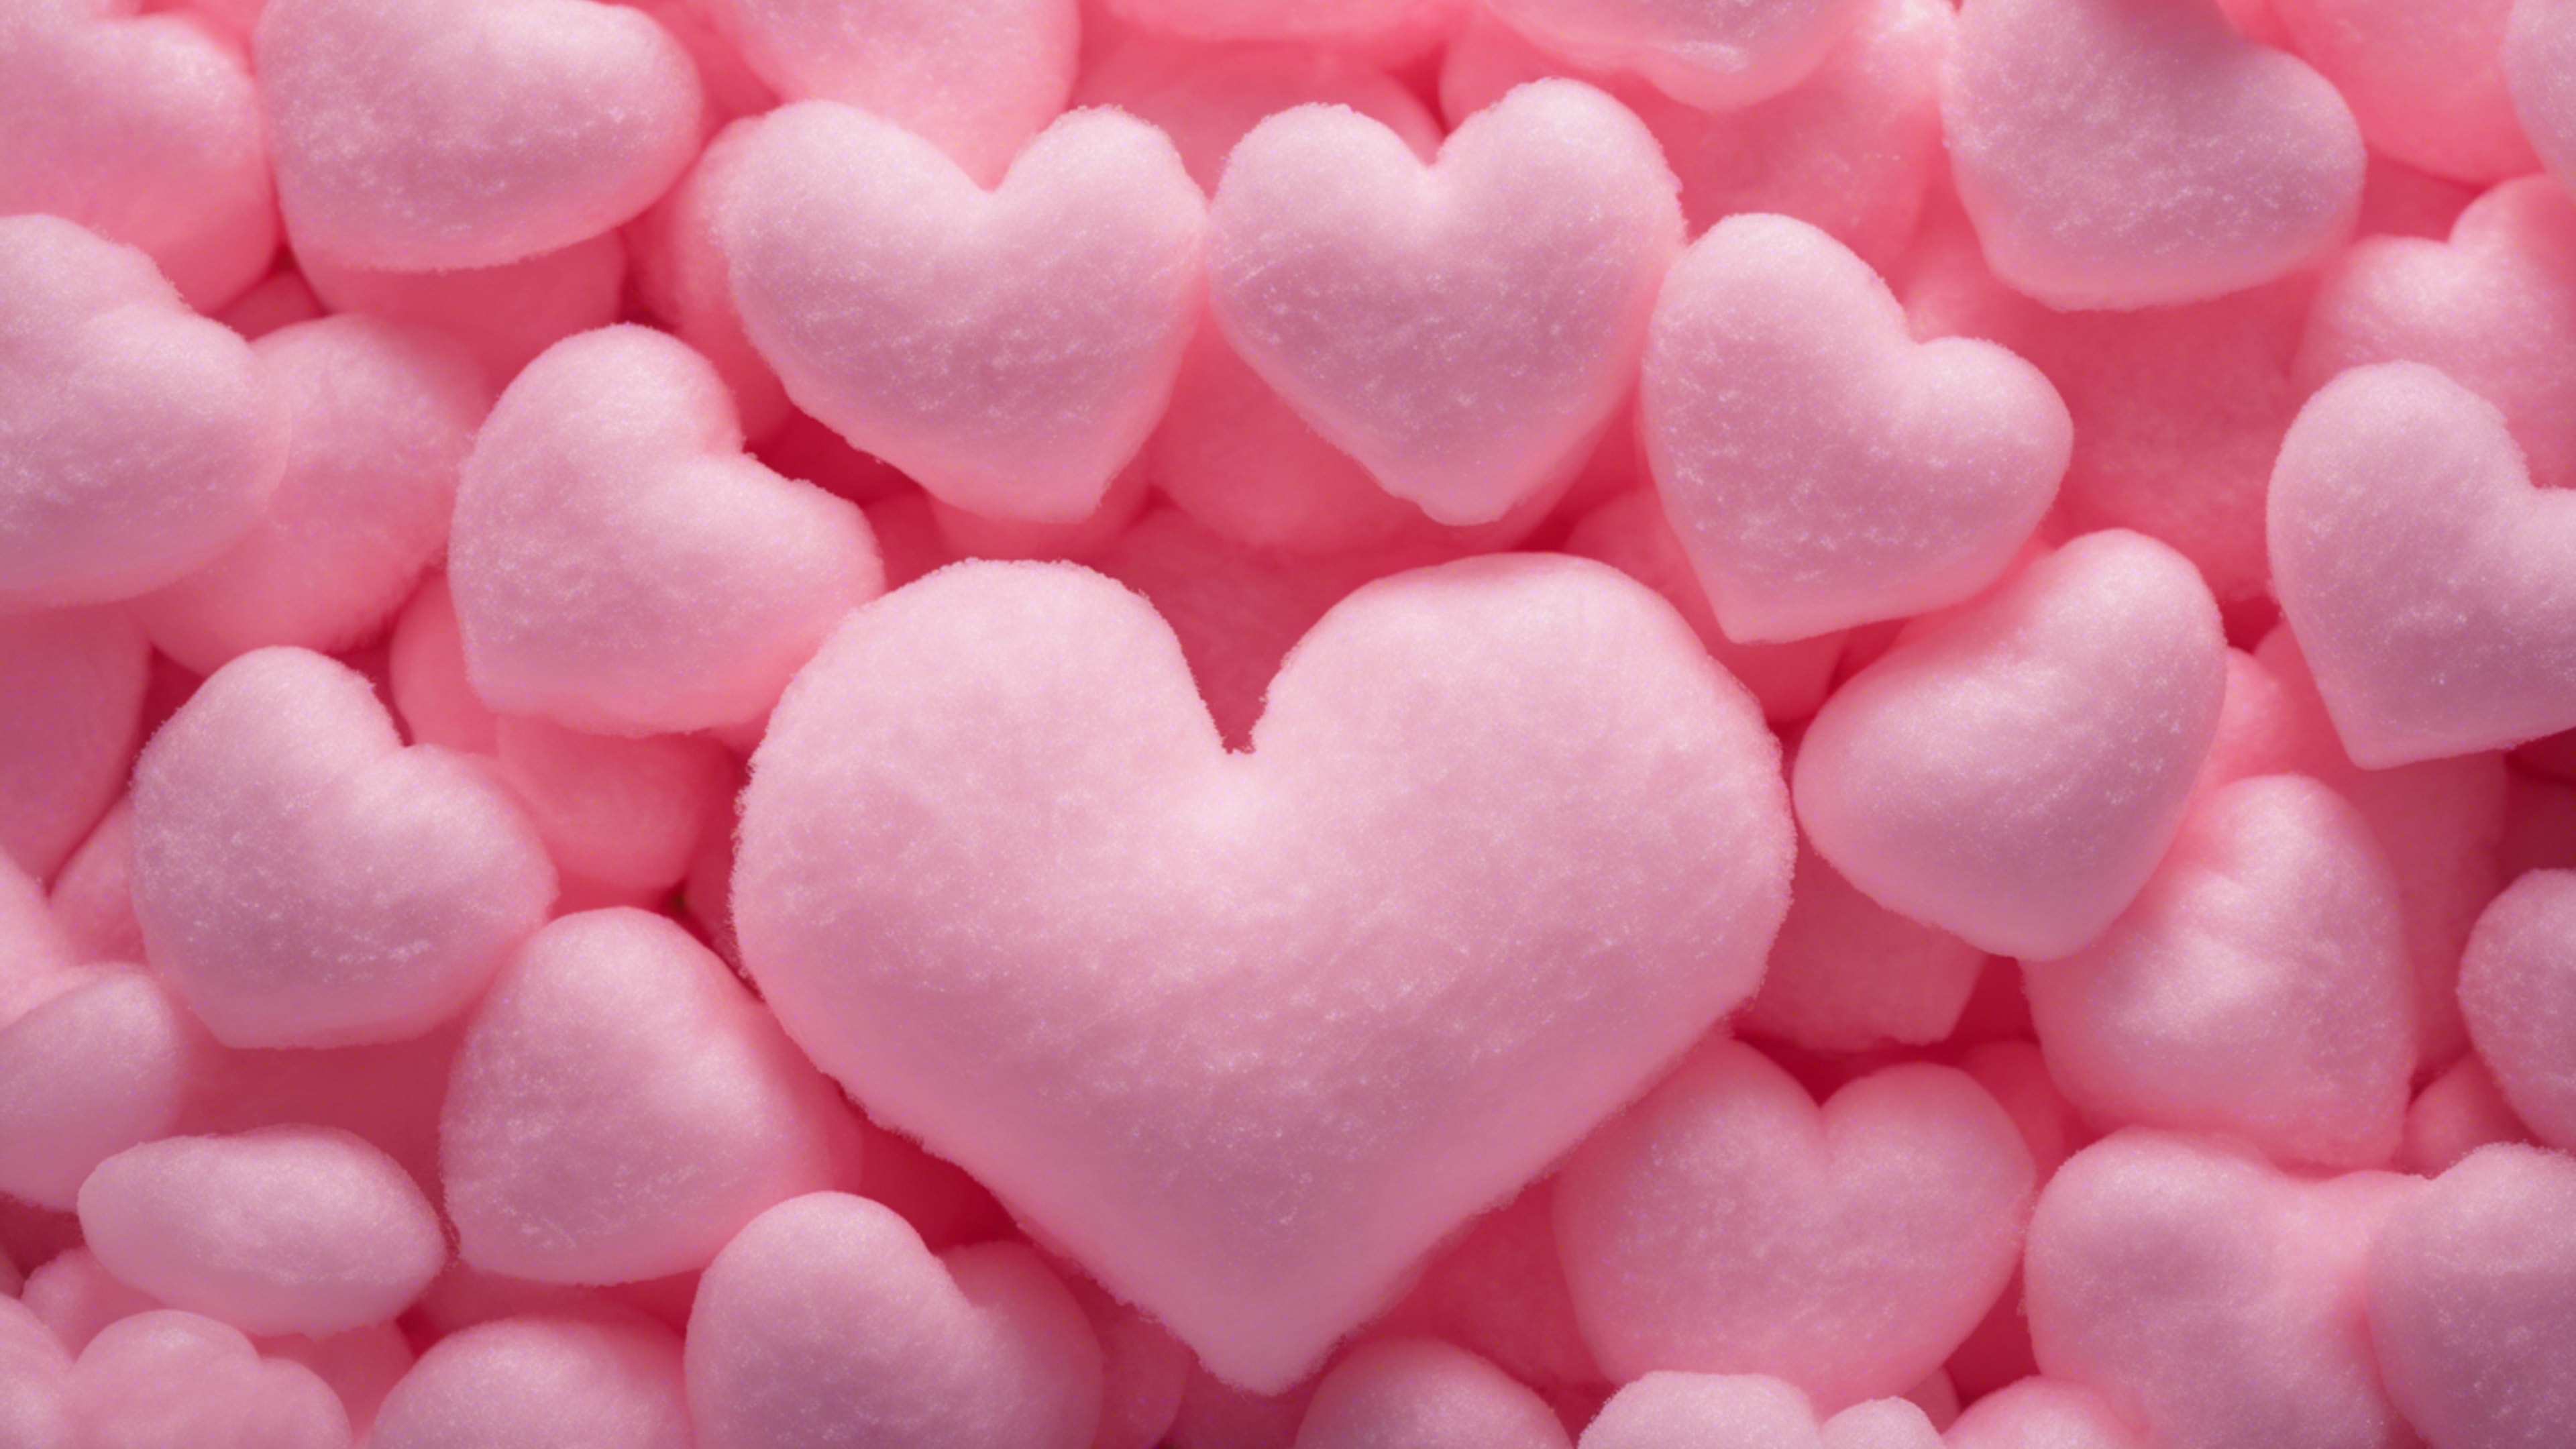 A soft pink heart made out of cotton candy at a vibrant fair. Wallpaper[30e2dbbee06047ebb6bb]